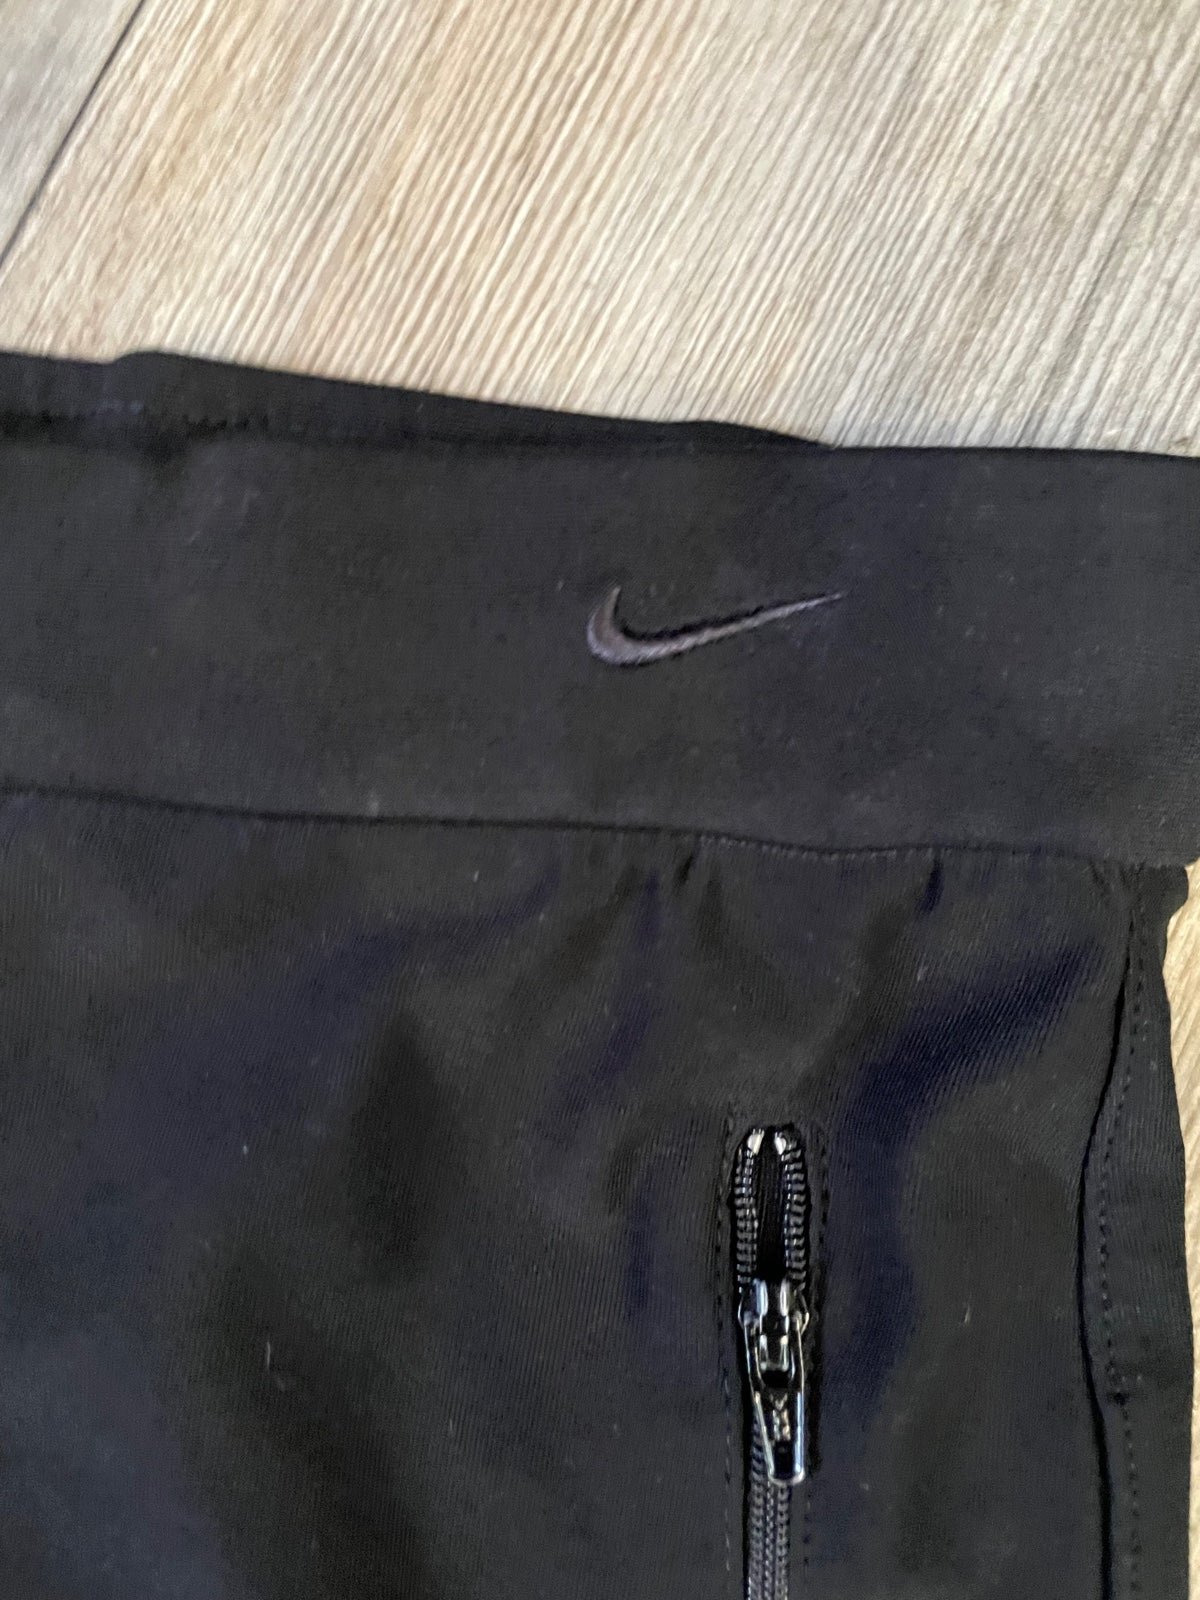 Factory Direct  Nike black womens pants jdqV6K0Md Factory Price